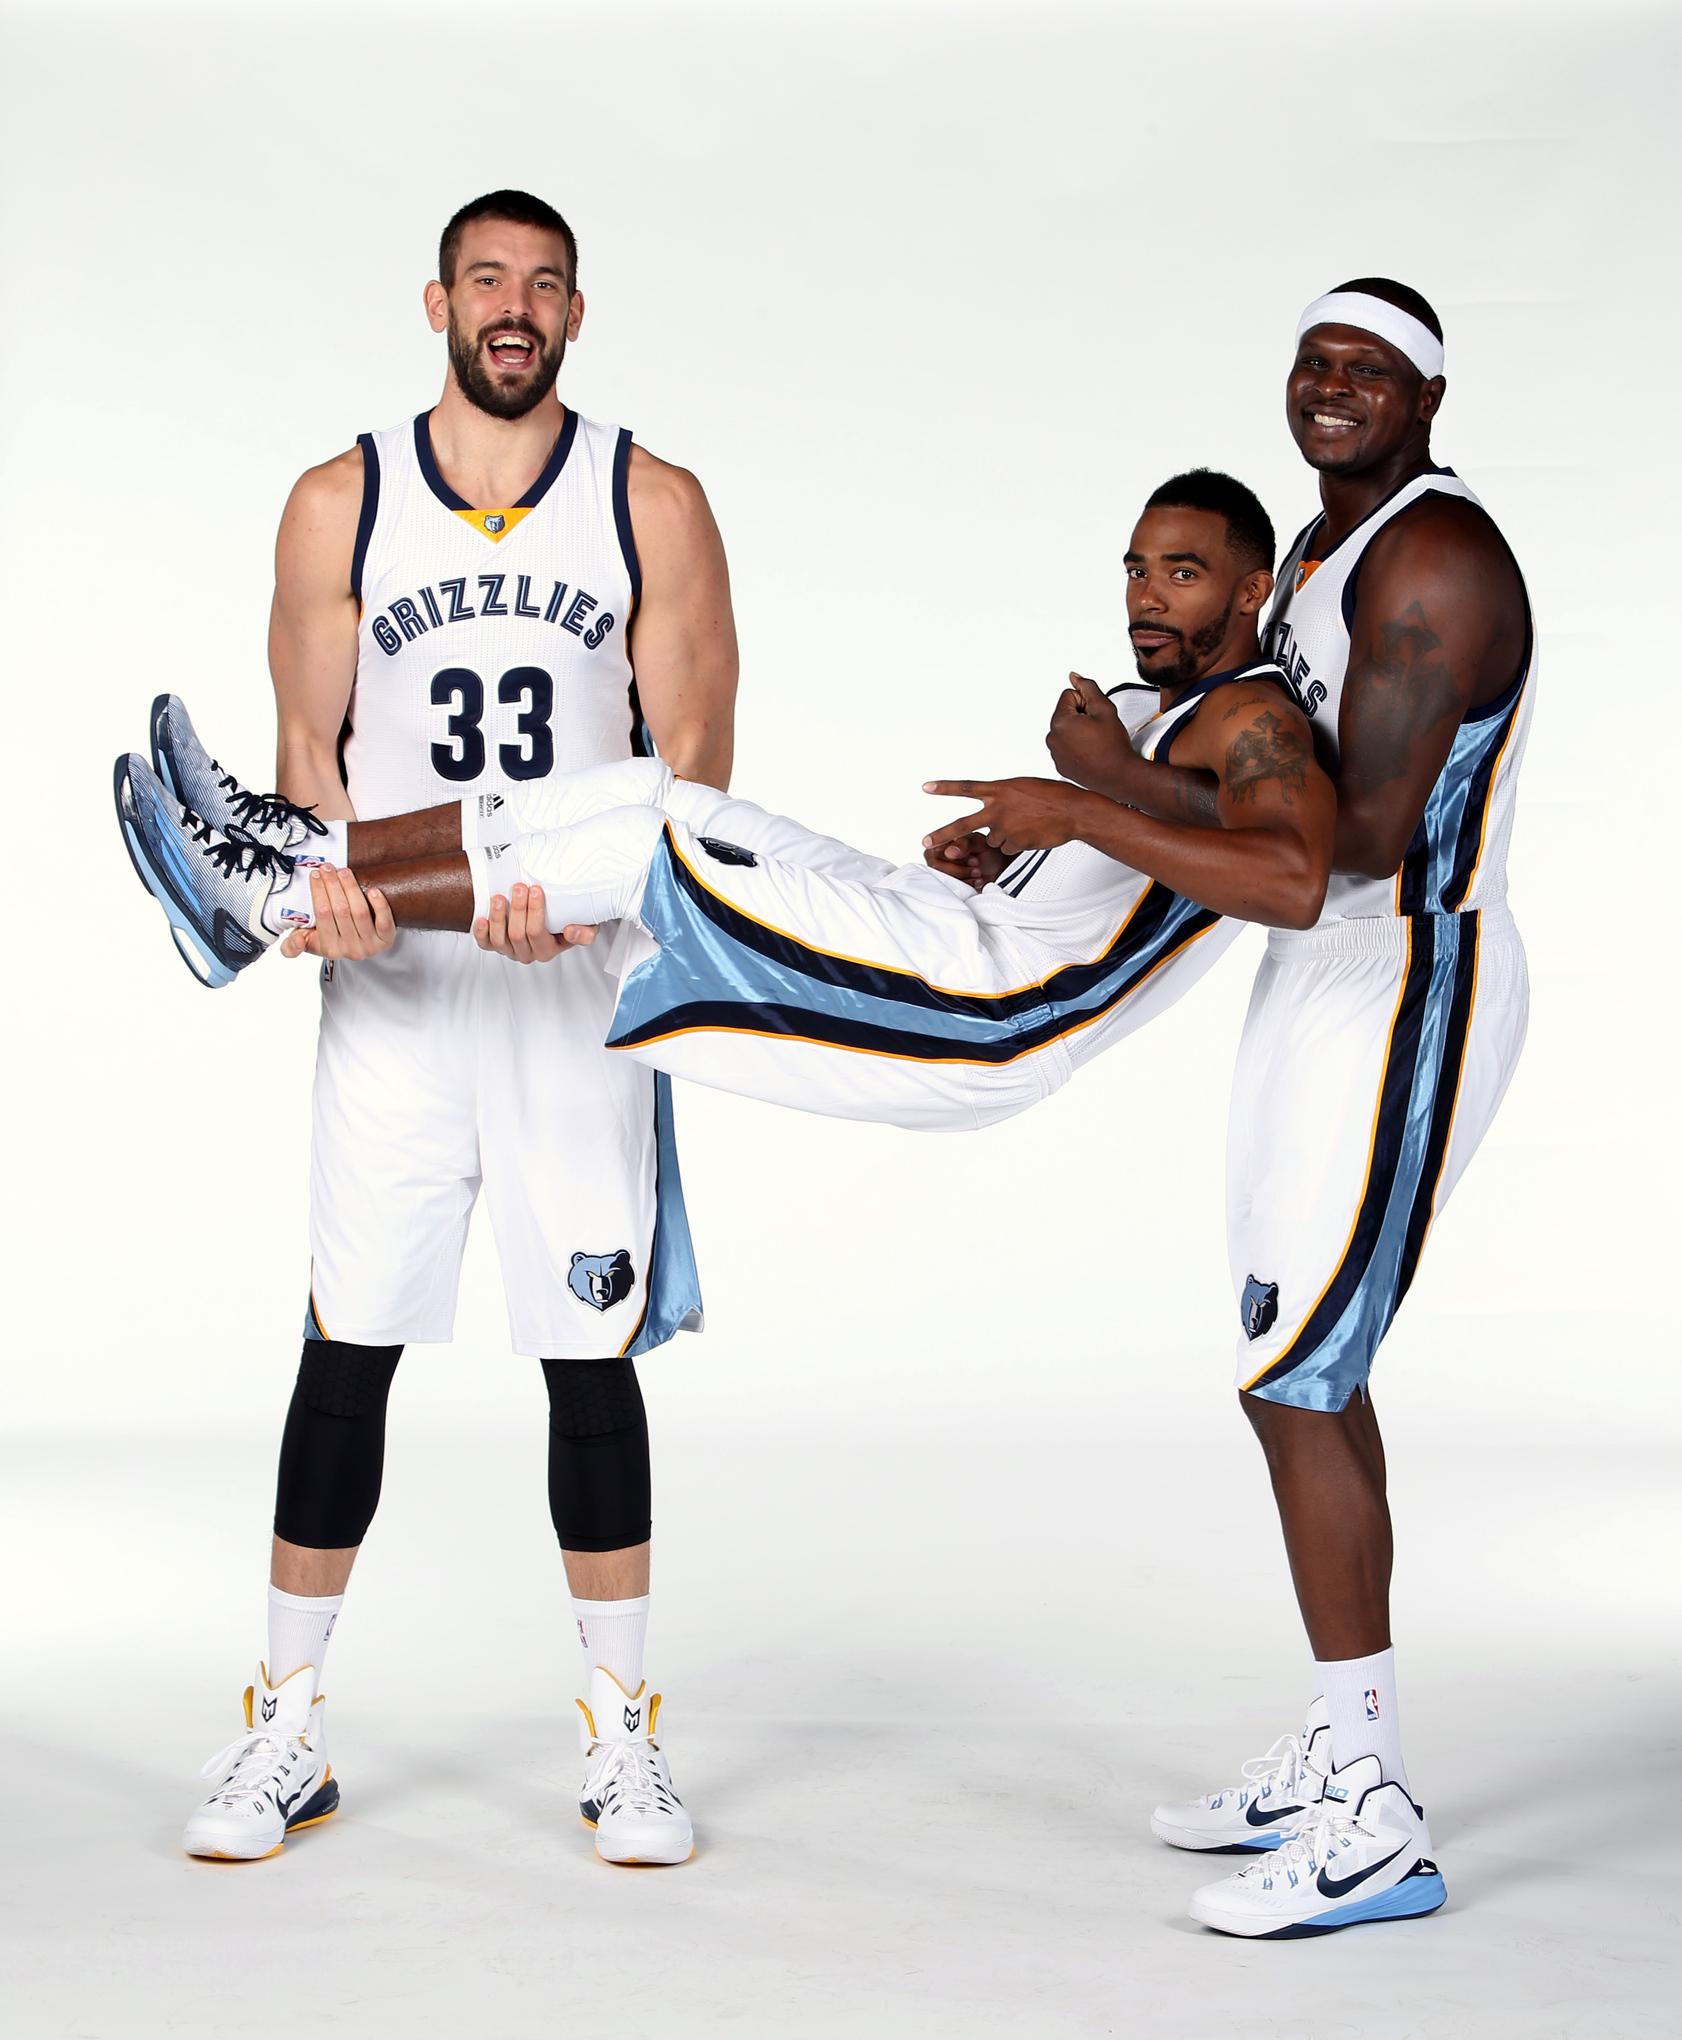 Mike Conley Can Carry The Grizzlies, But Z Bo And Marc Can Most